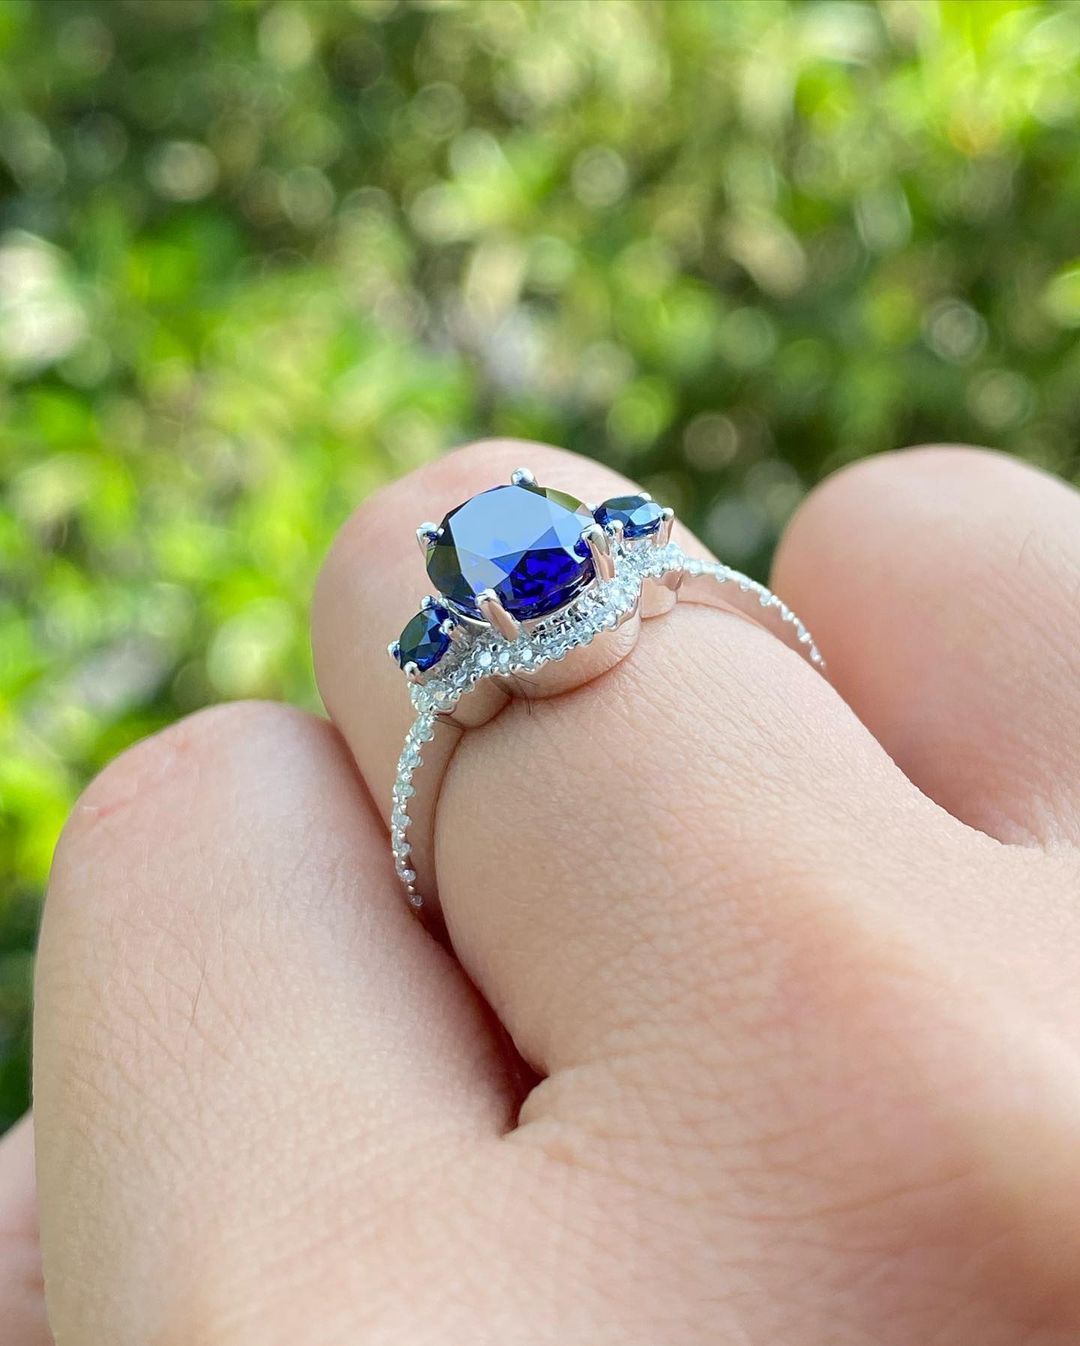 Woman defends $130 engagement ring in viral Facebook post